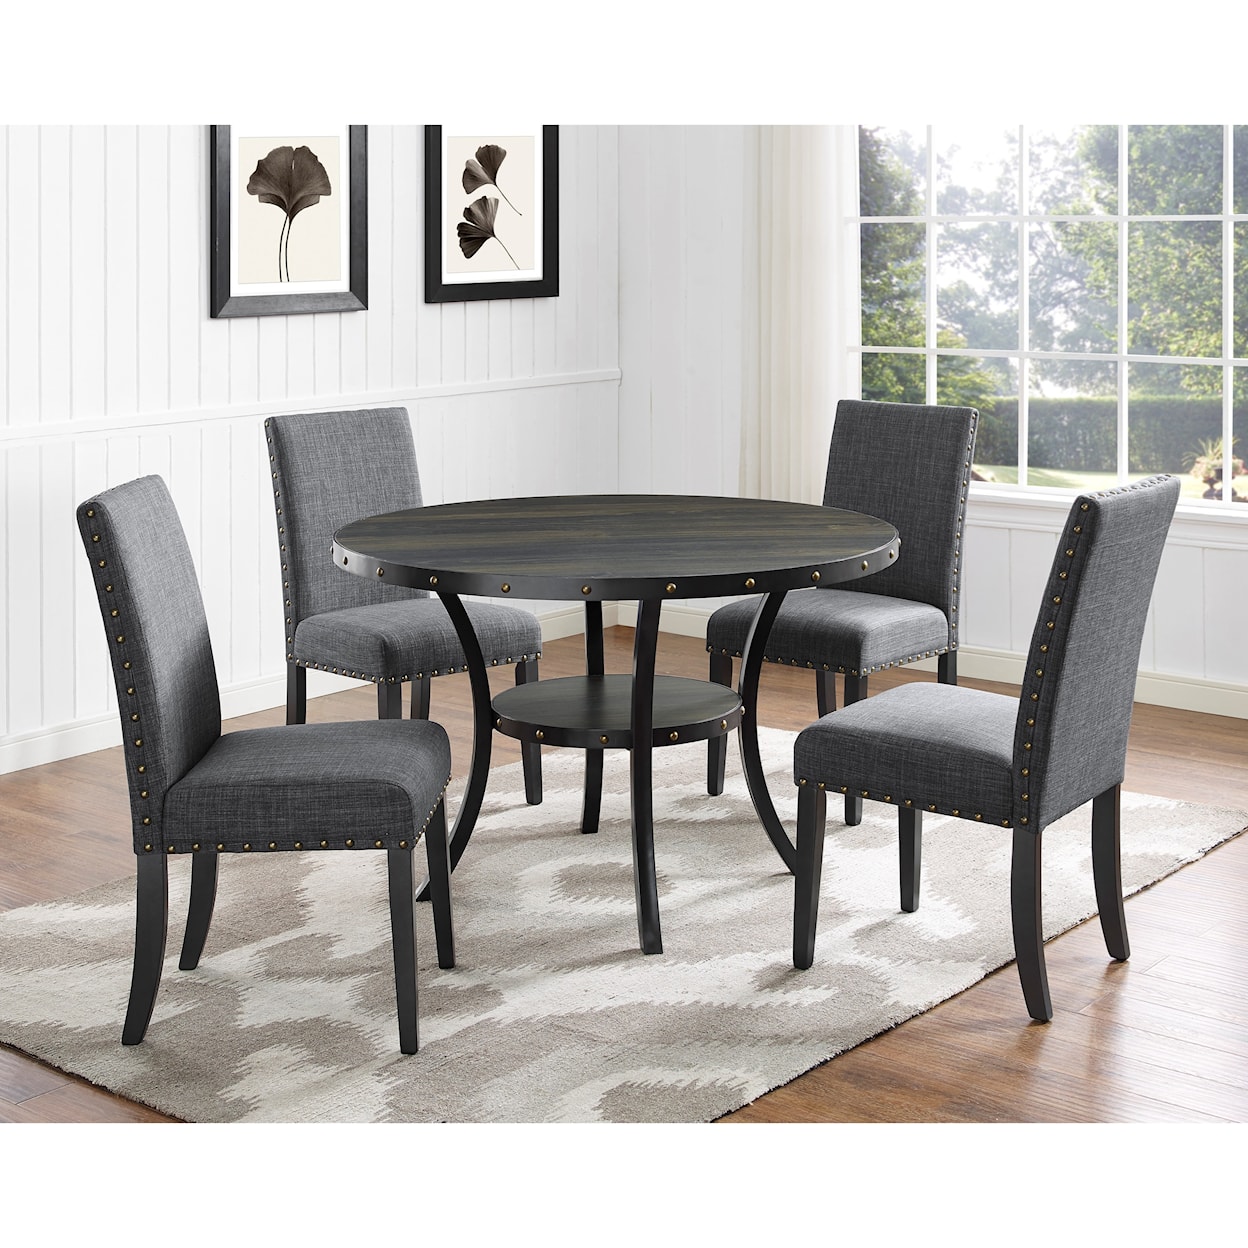 New Classic Crispin 5-Piece Table and Chair Set